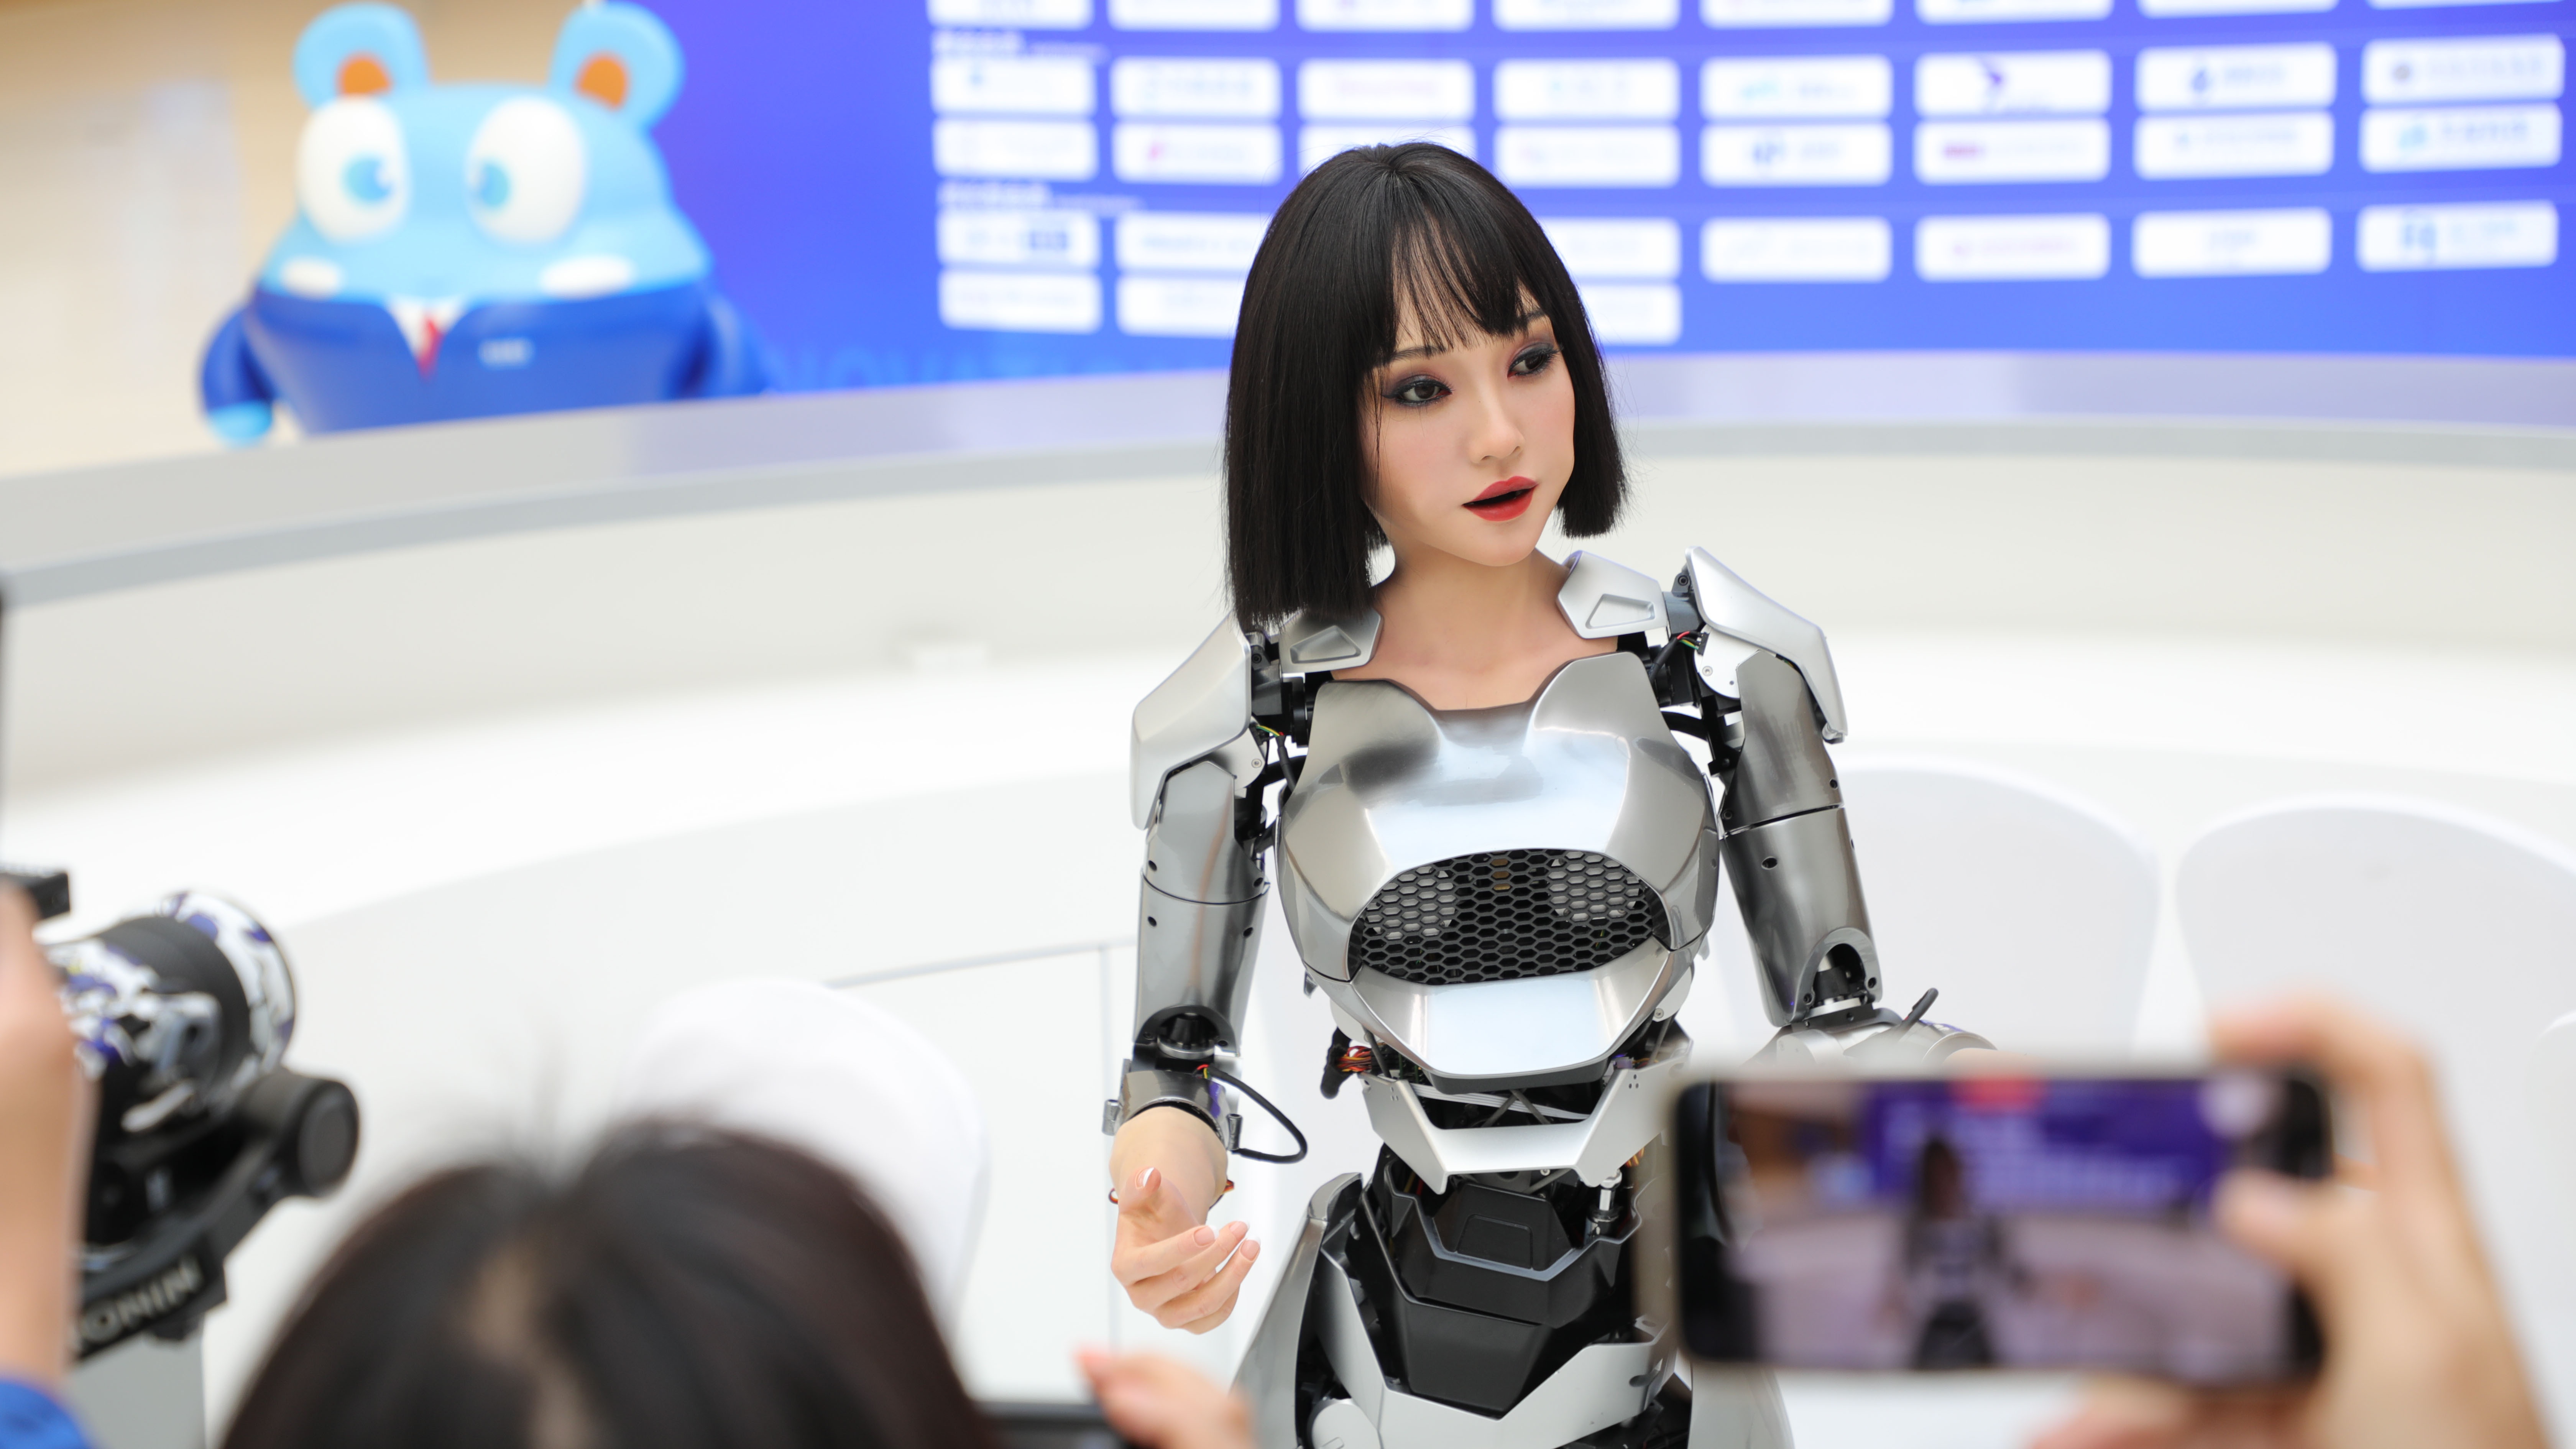 An AI generated content (AIGC) humanoid robot is on display at the 2024 Zhongguancun Forum in Beijing, China. Image: Li He/VCG via Getty Images